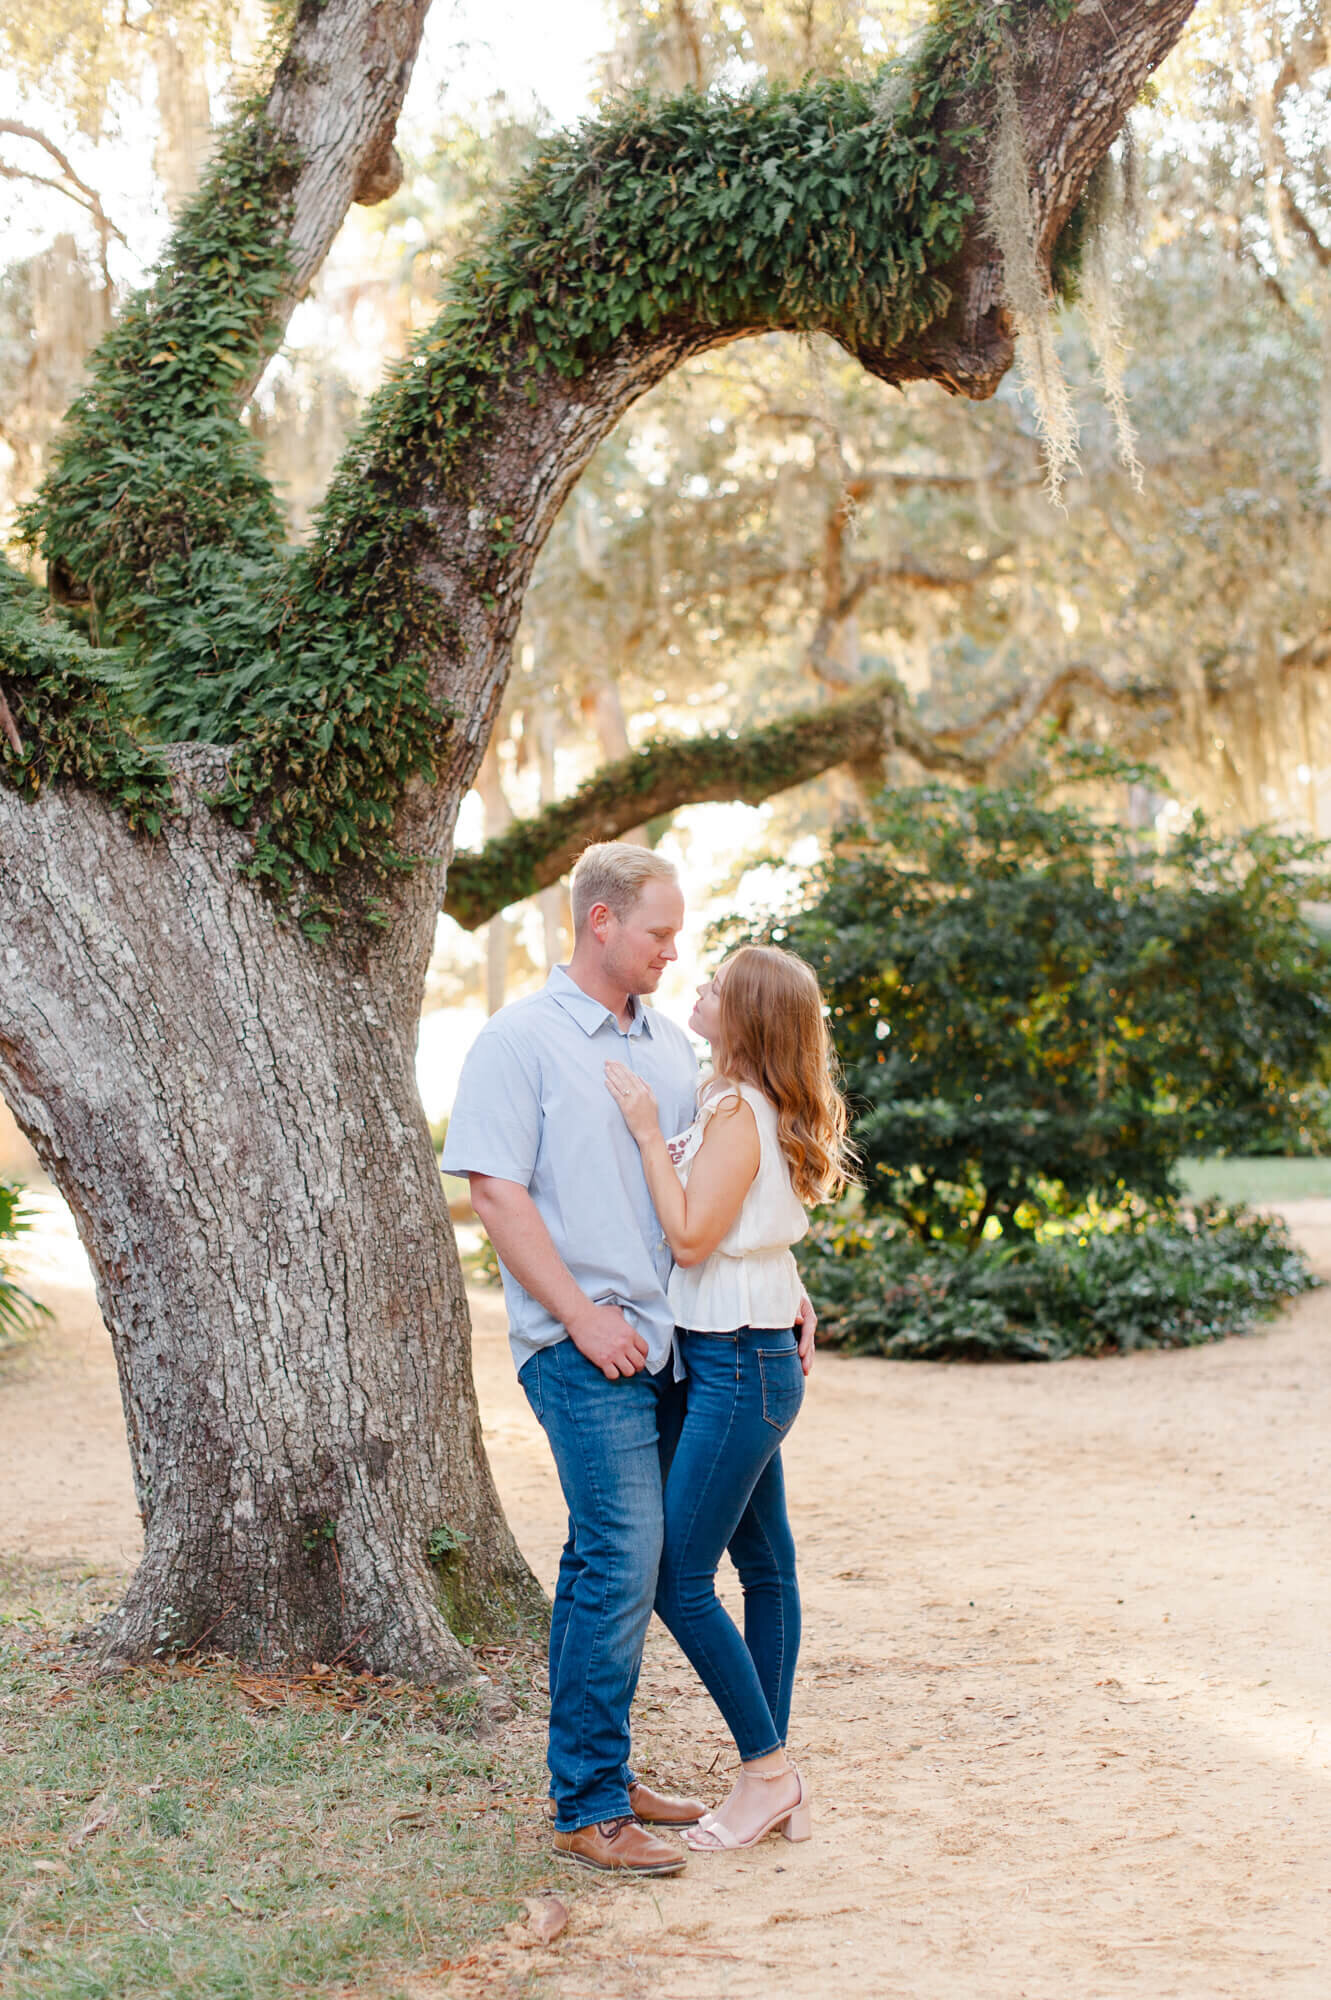 Couple embracing while standing near a tree at Washington Oaks Gardens State Park